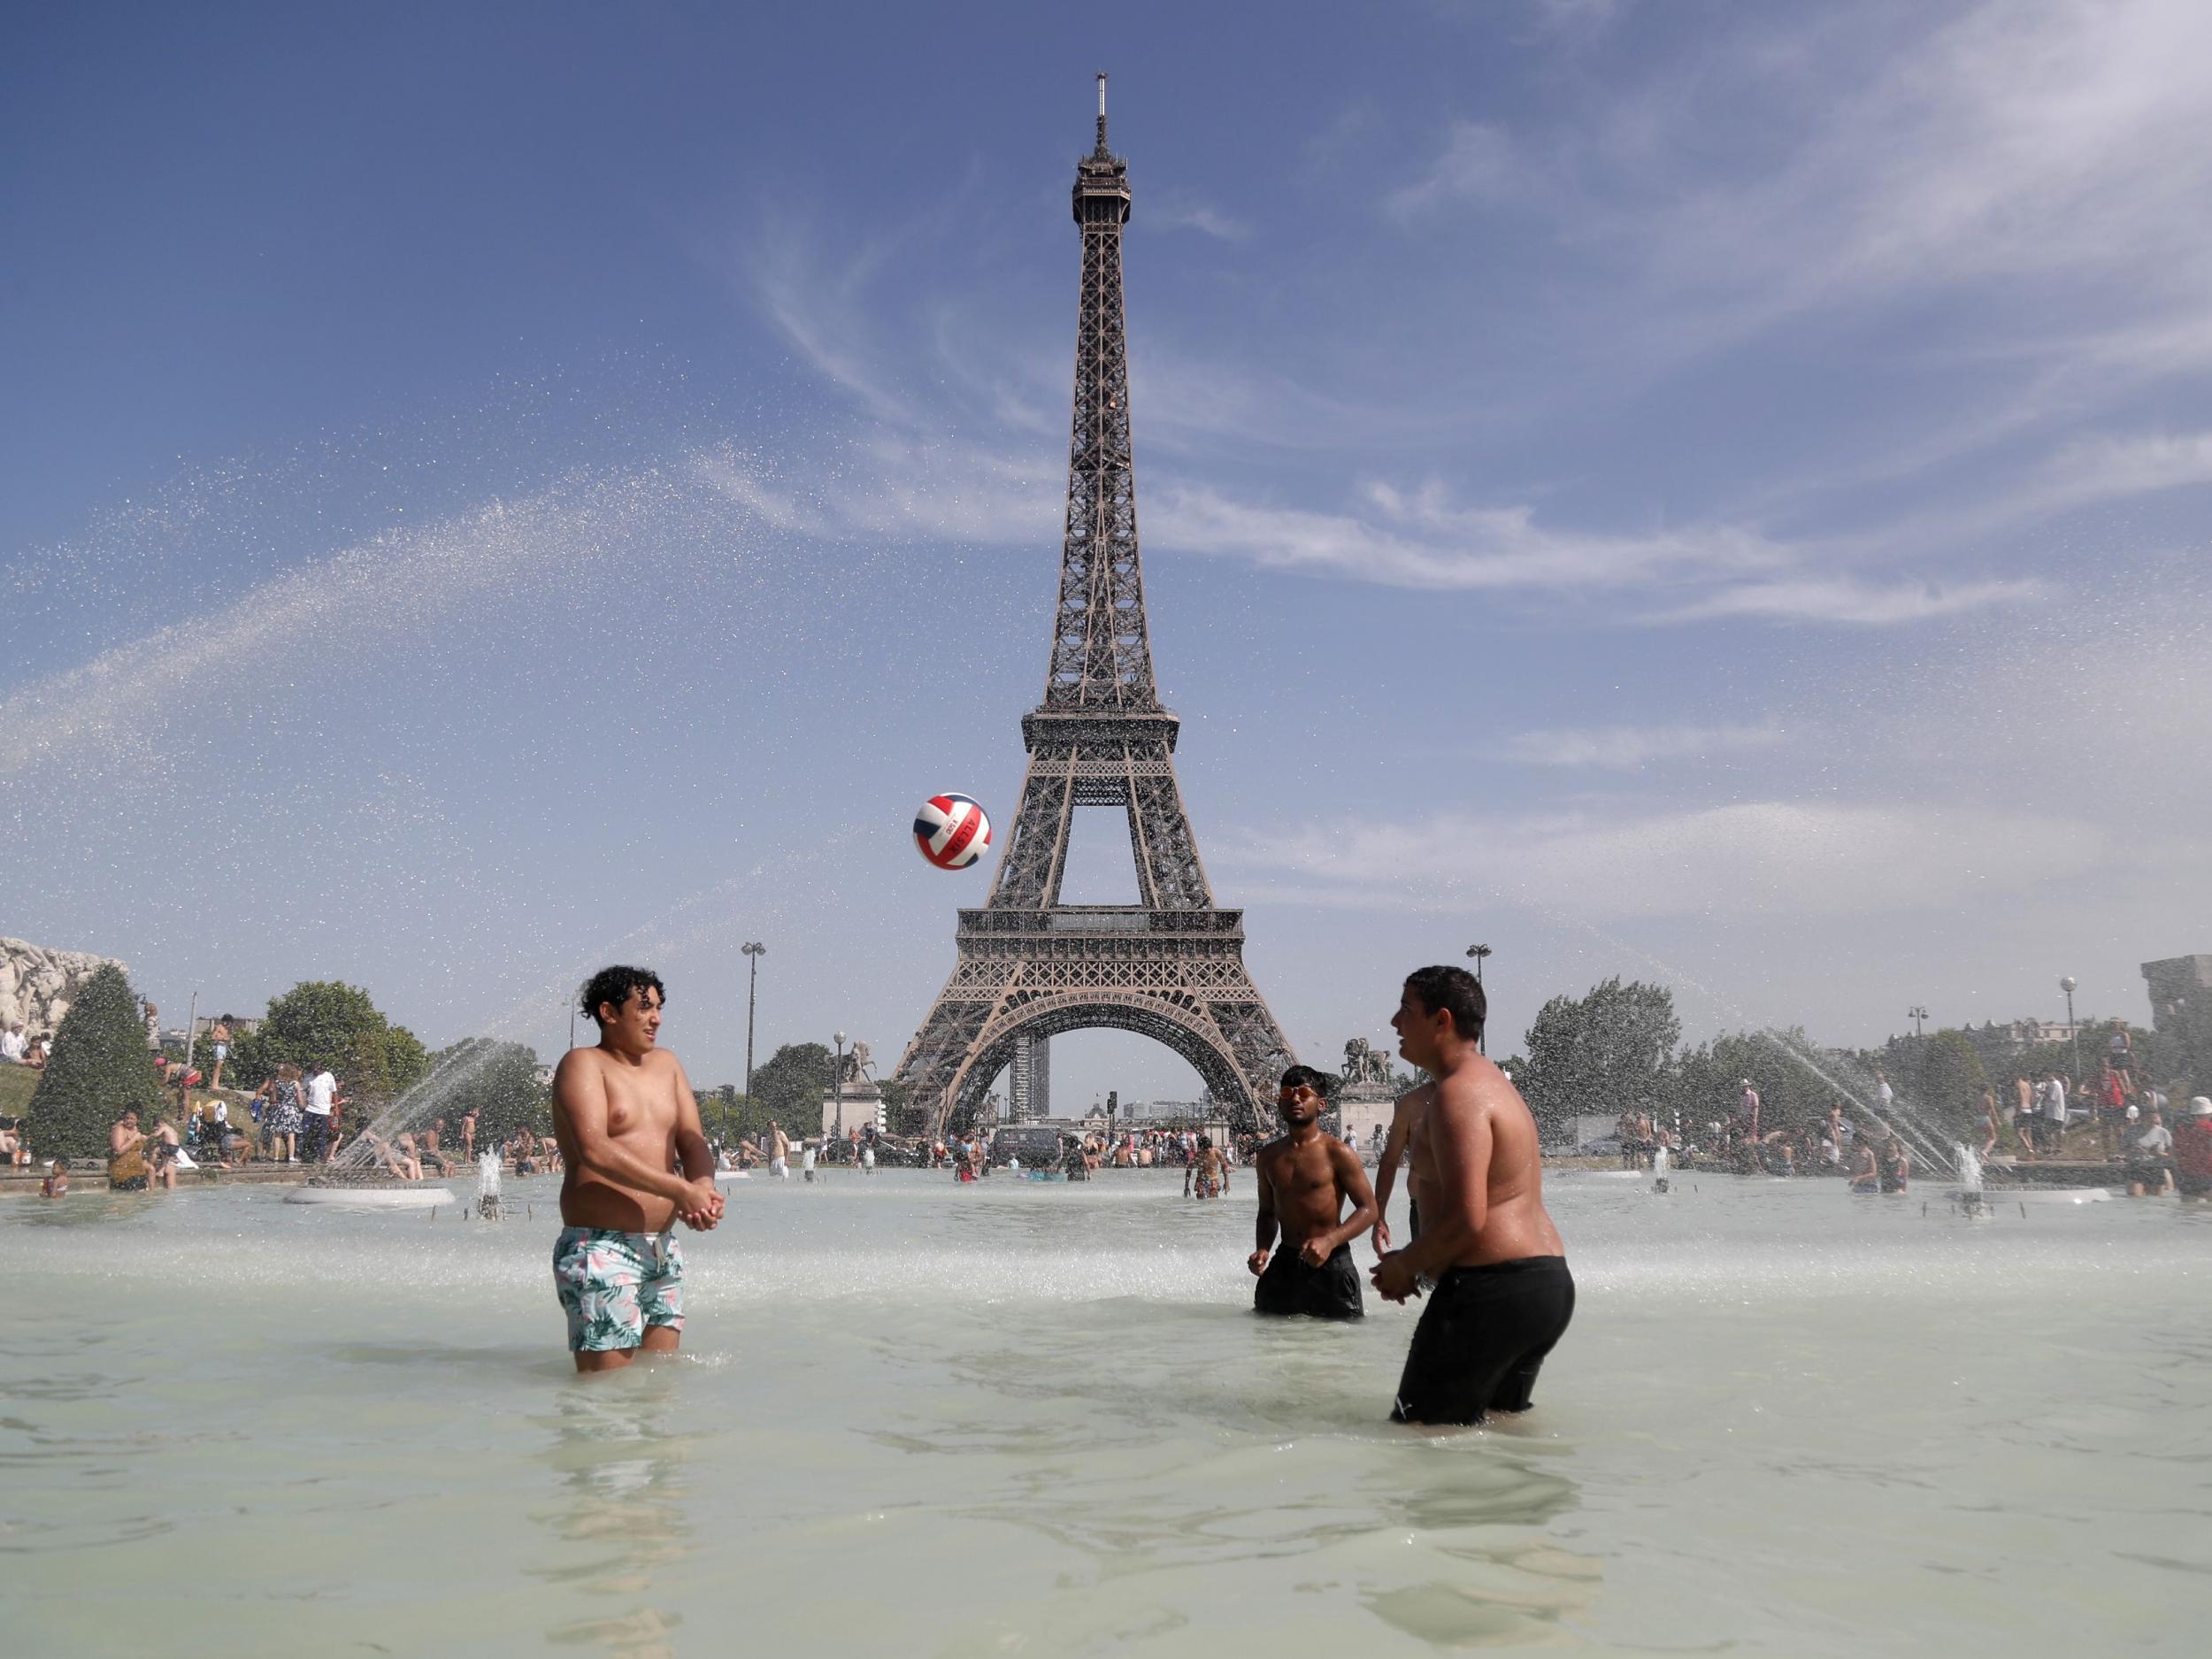 Paris experienced a heatwave in late June but temperatures are forecast to be even hotter this week